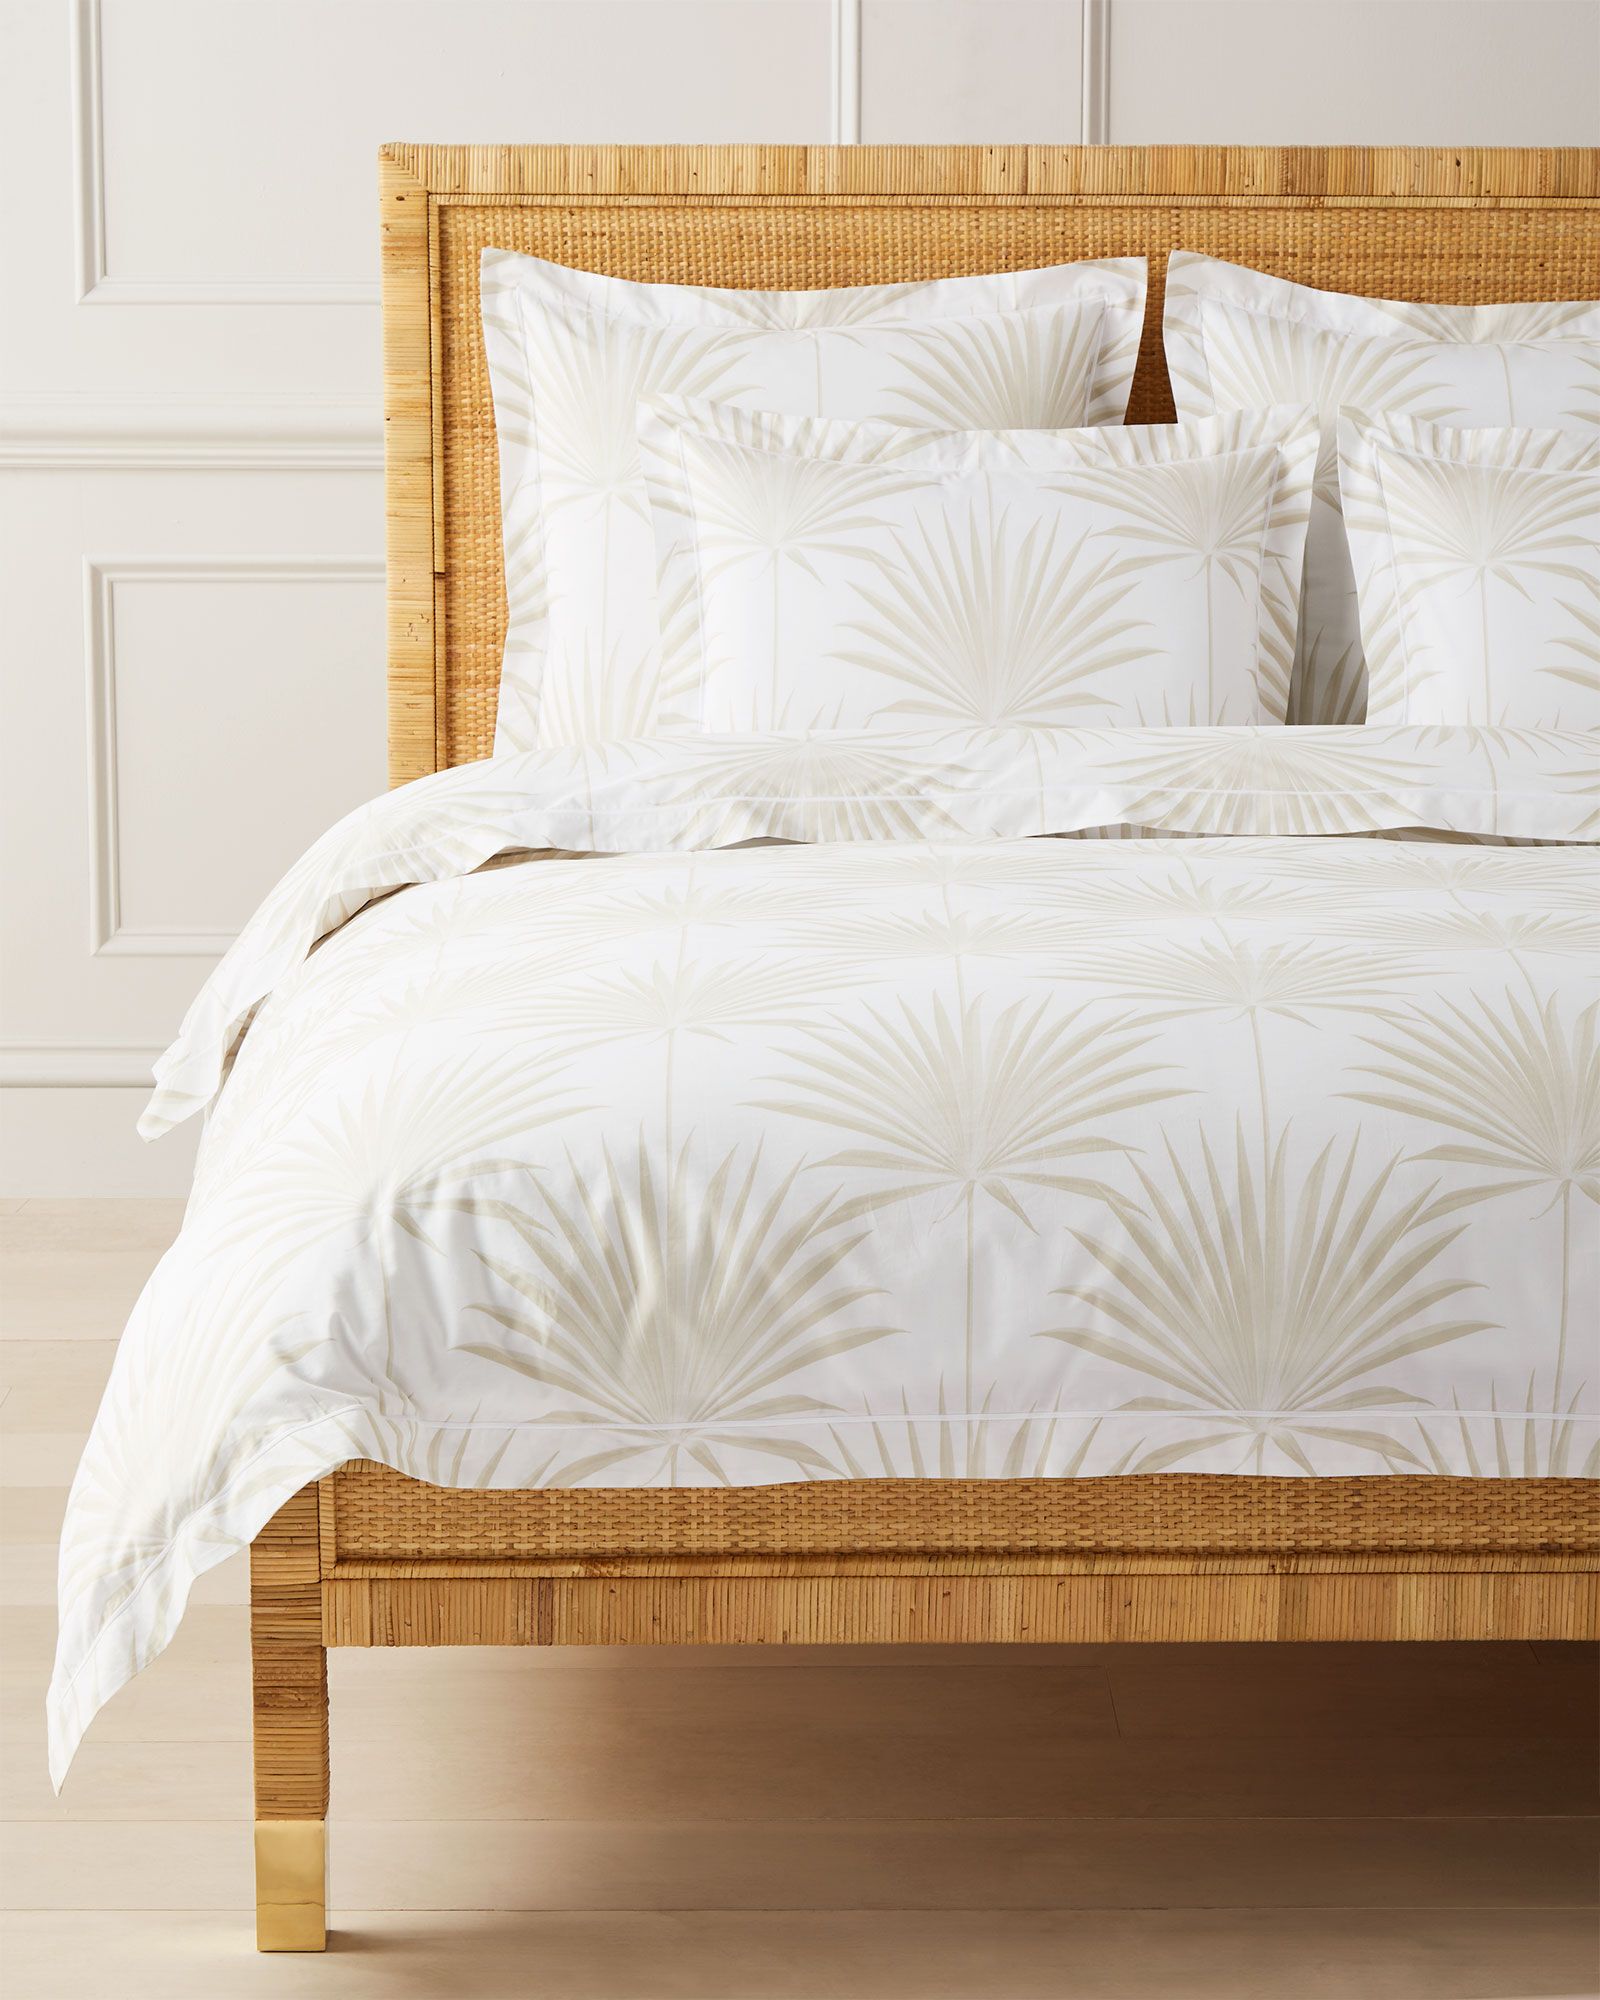 Island Palm Duvet Cover | Serena and Lily